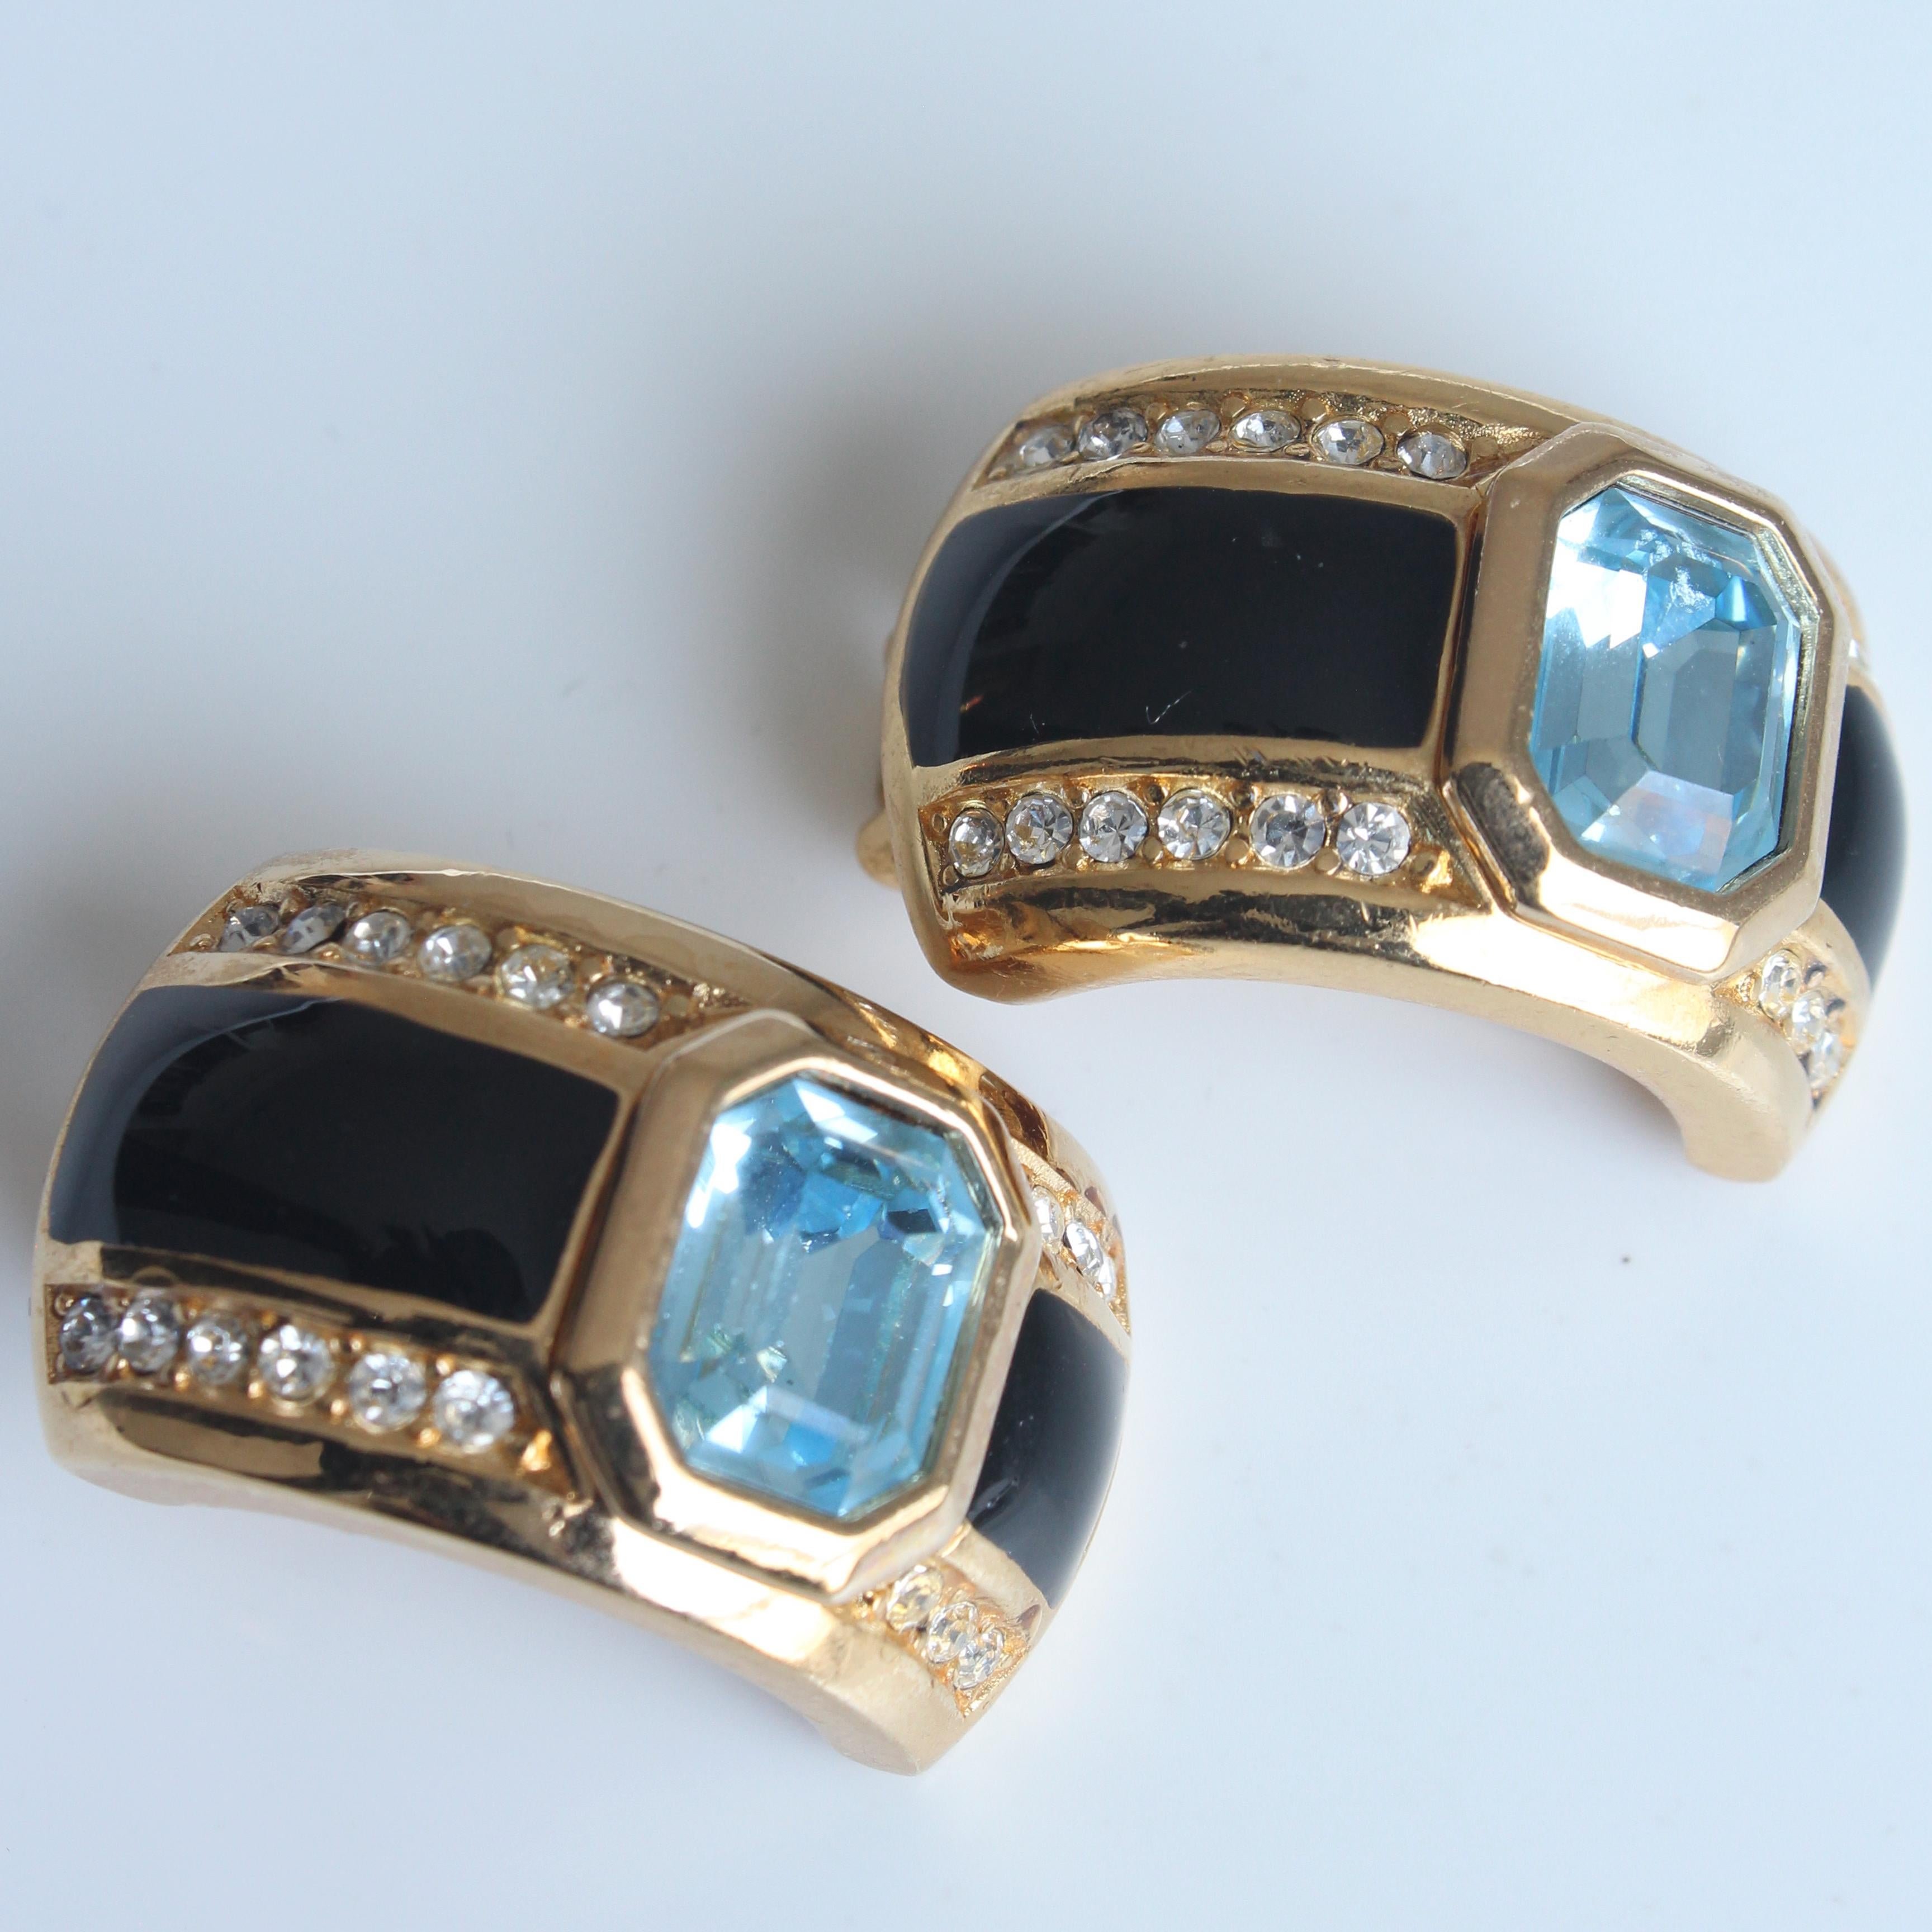 Christian Dior Art Deco Earrings with Faux Sapphire Topaz Crystals 1980s For Sale 5